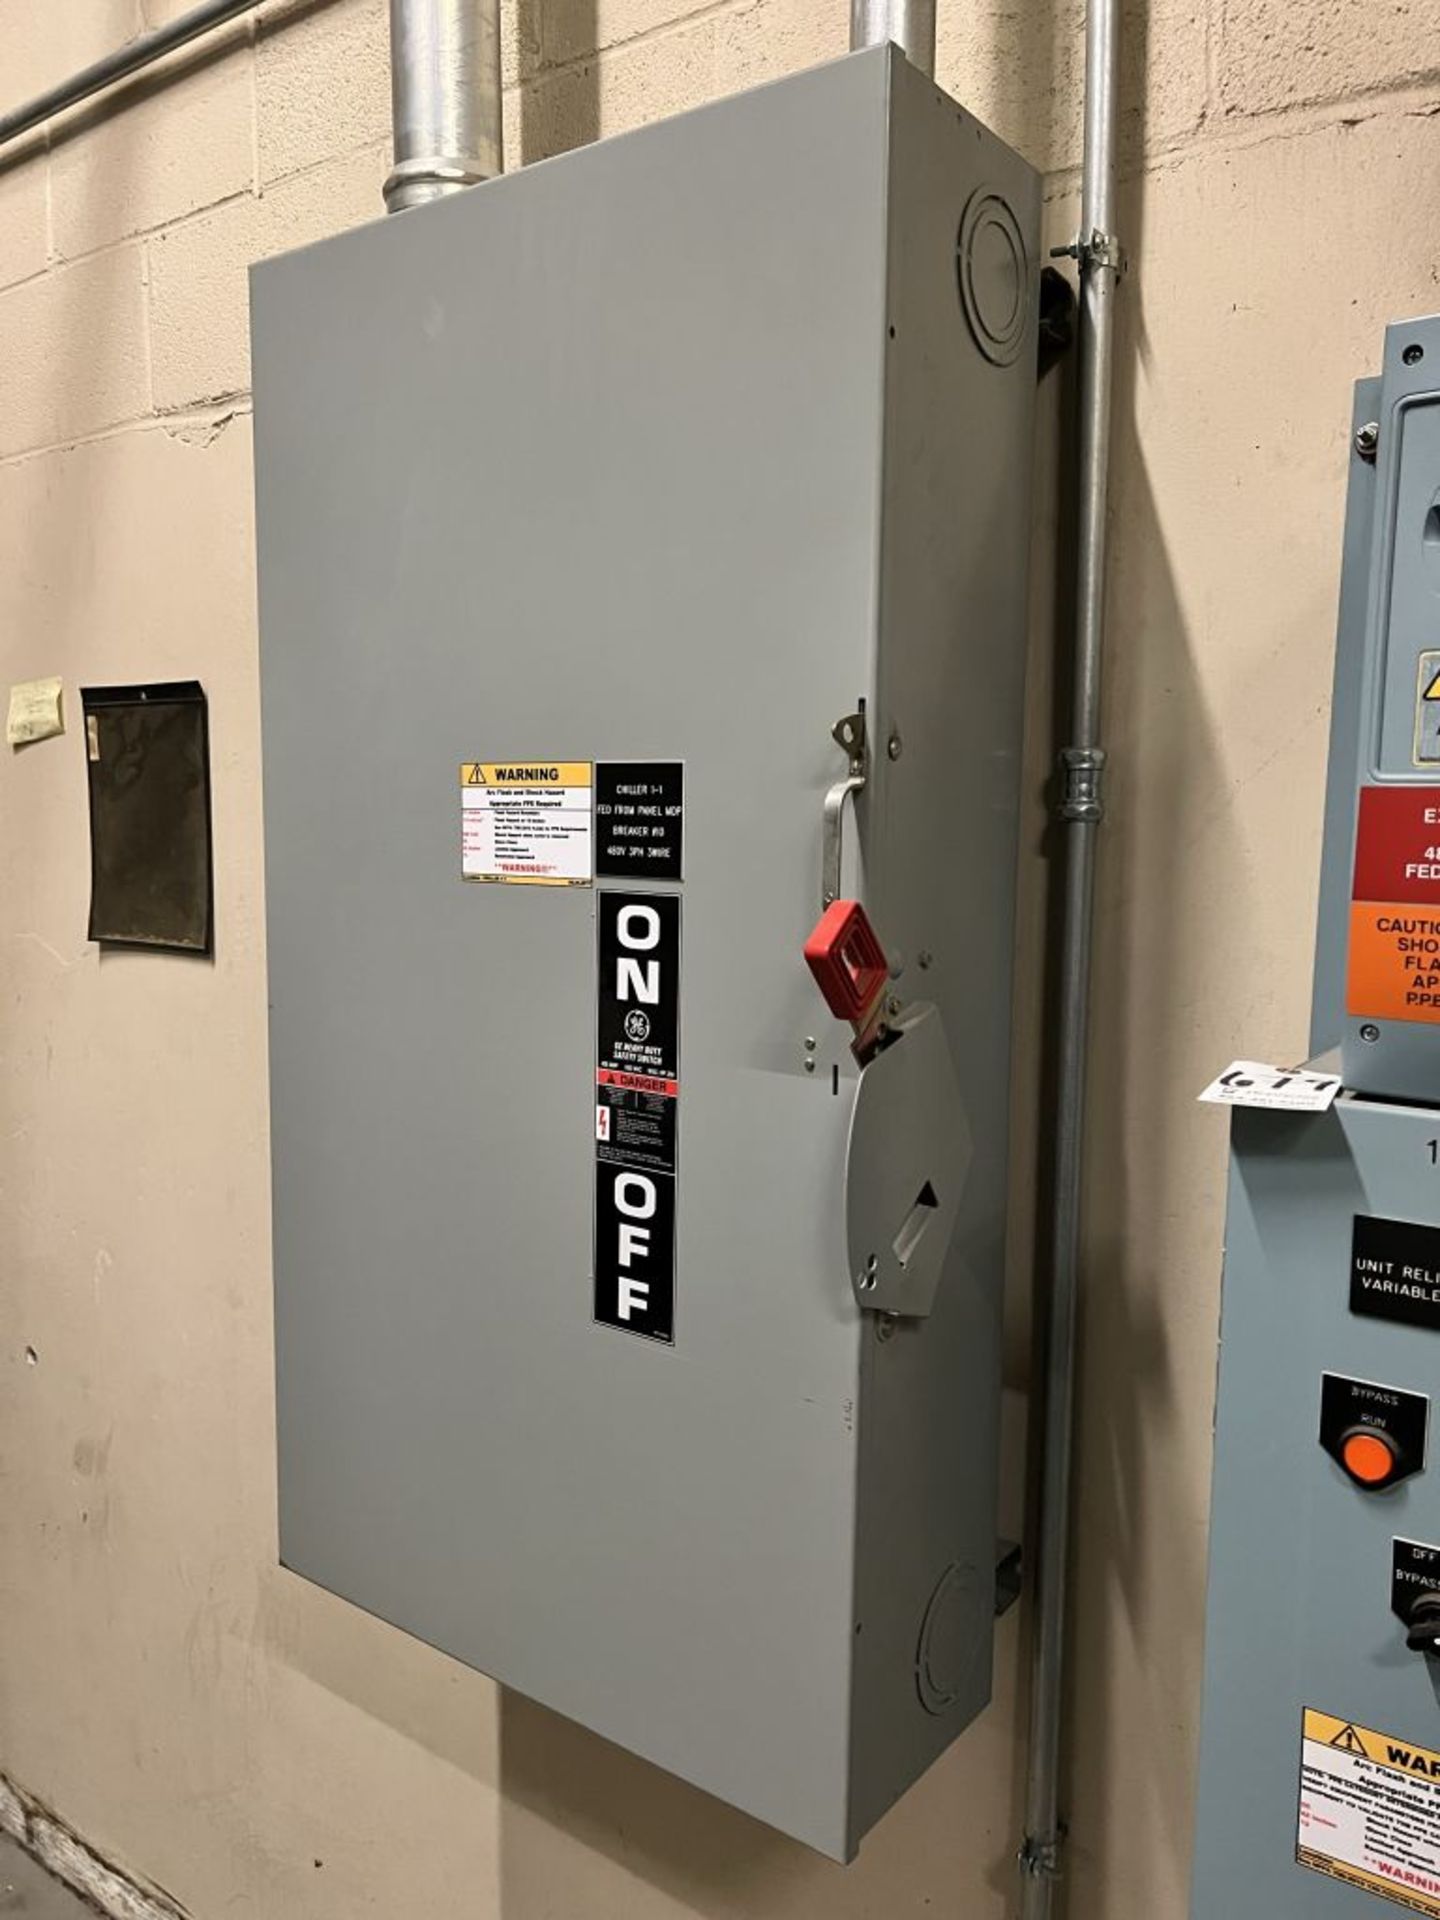 Spartanburg, SC - GE Heavy Duty Safety Switch - Image 3 of 5